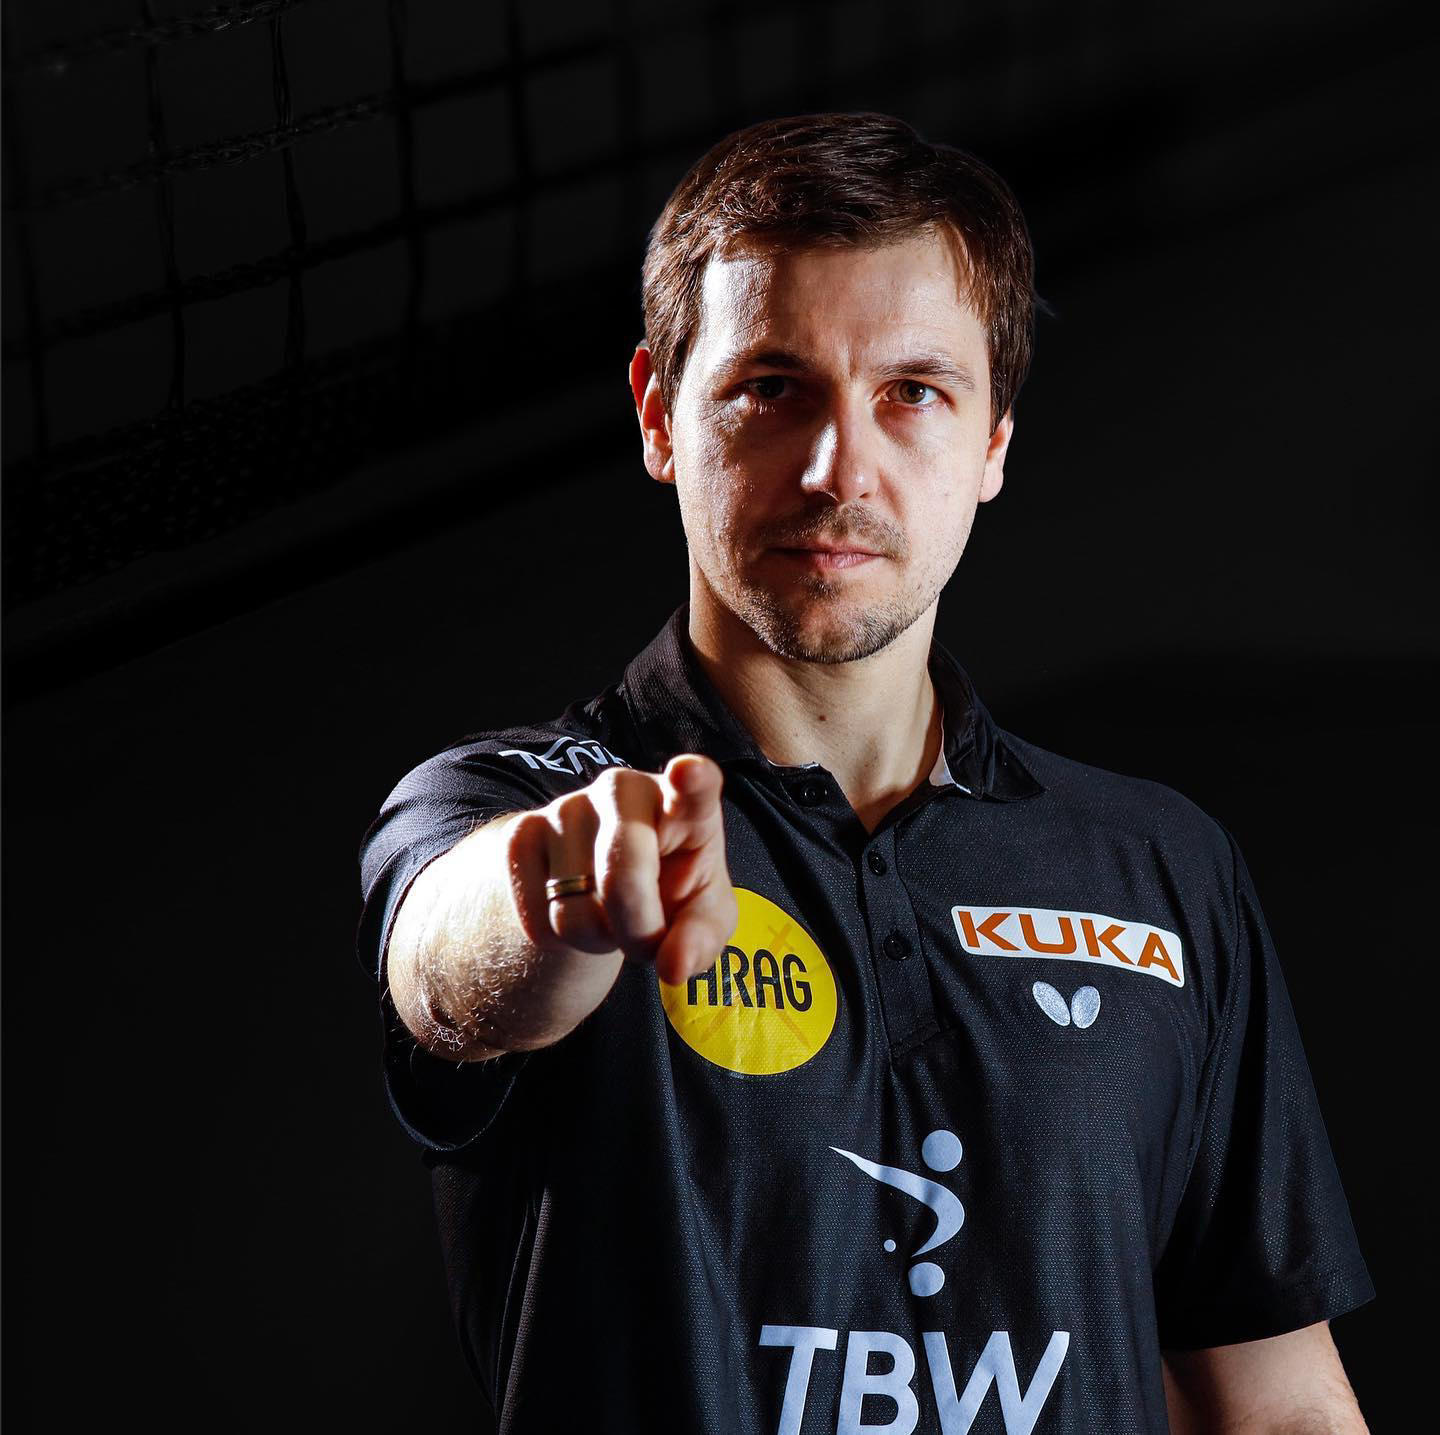 With Timo Boll Webcoach, my team and I have found a solution to make all my know-how available to ev